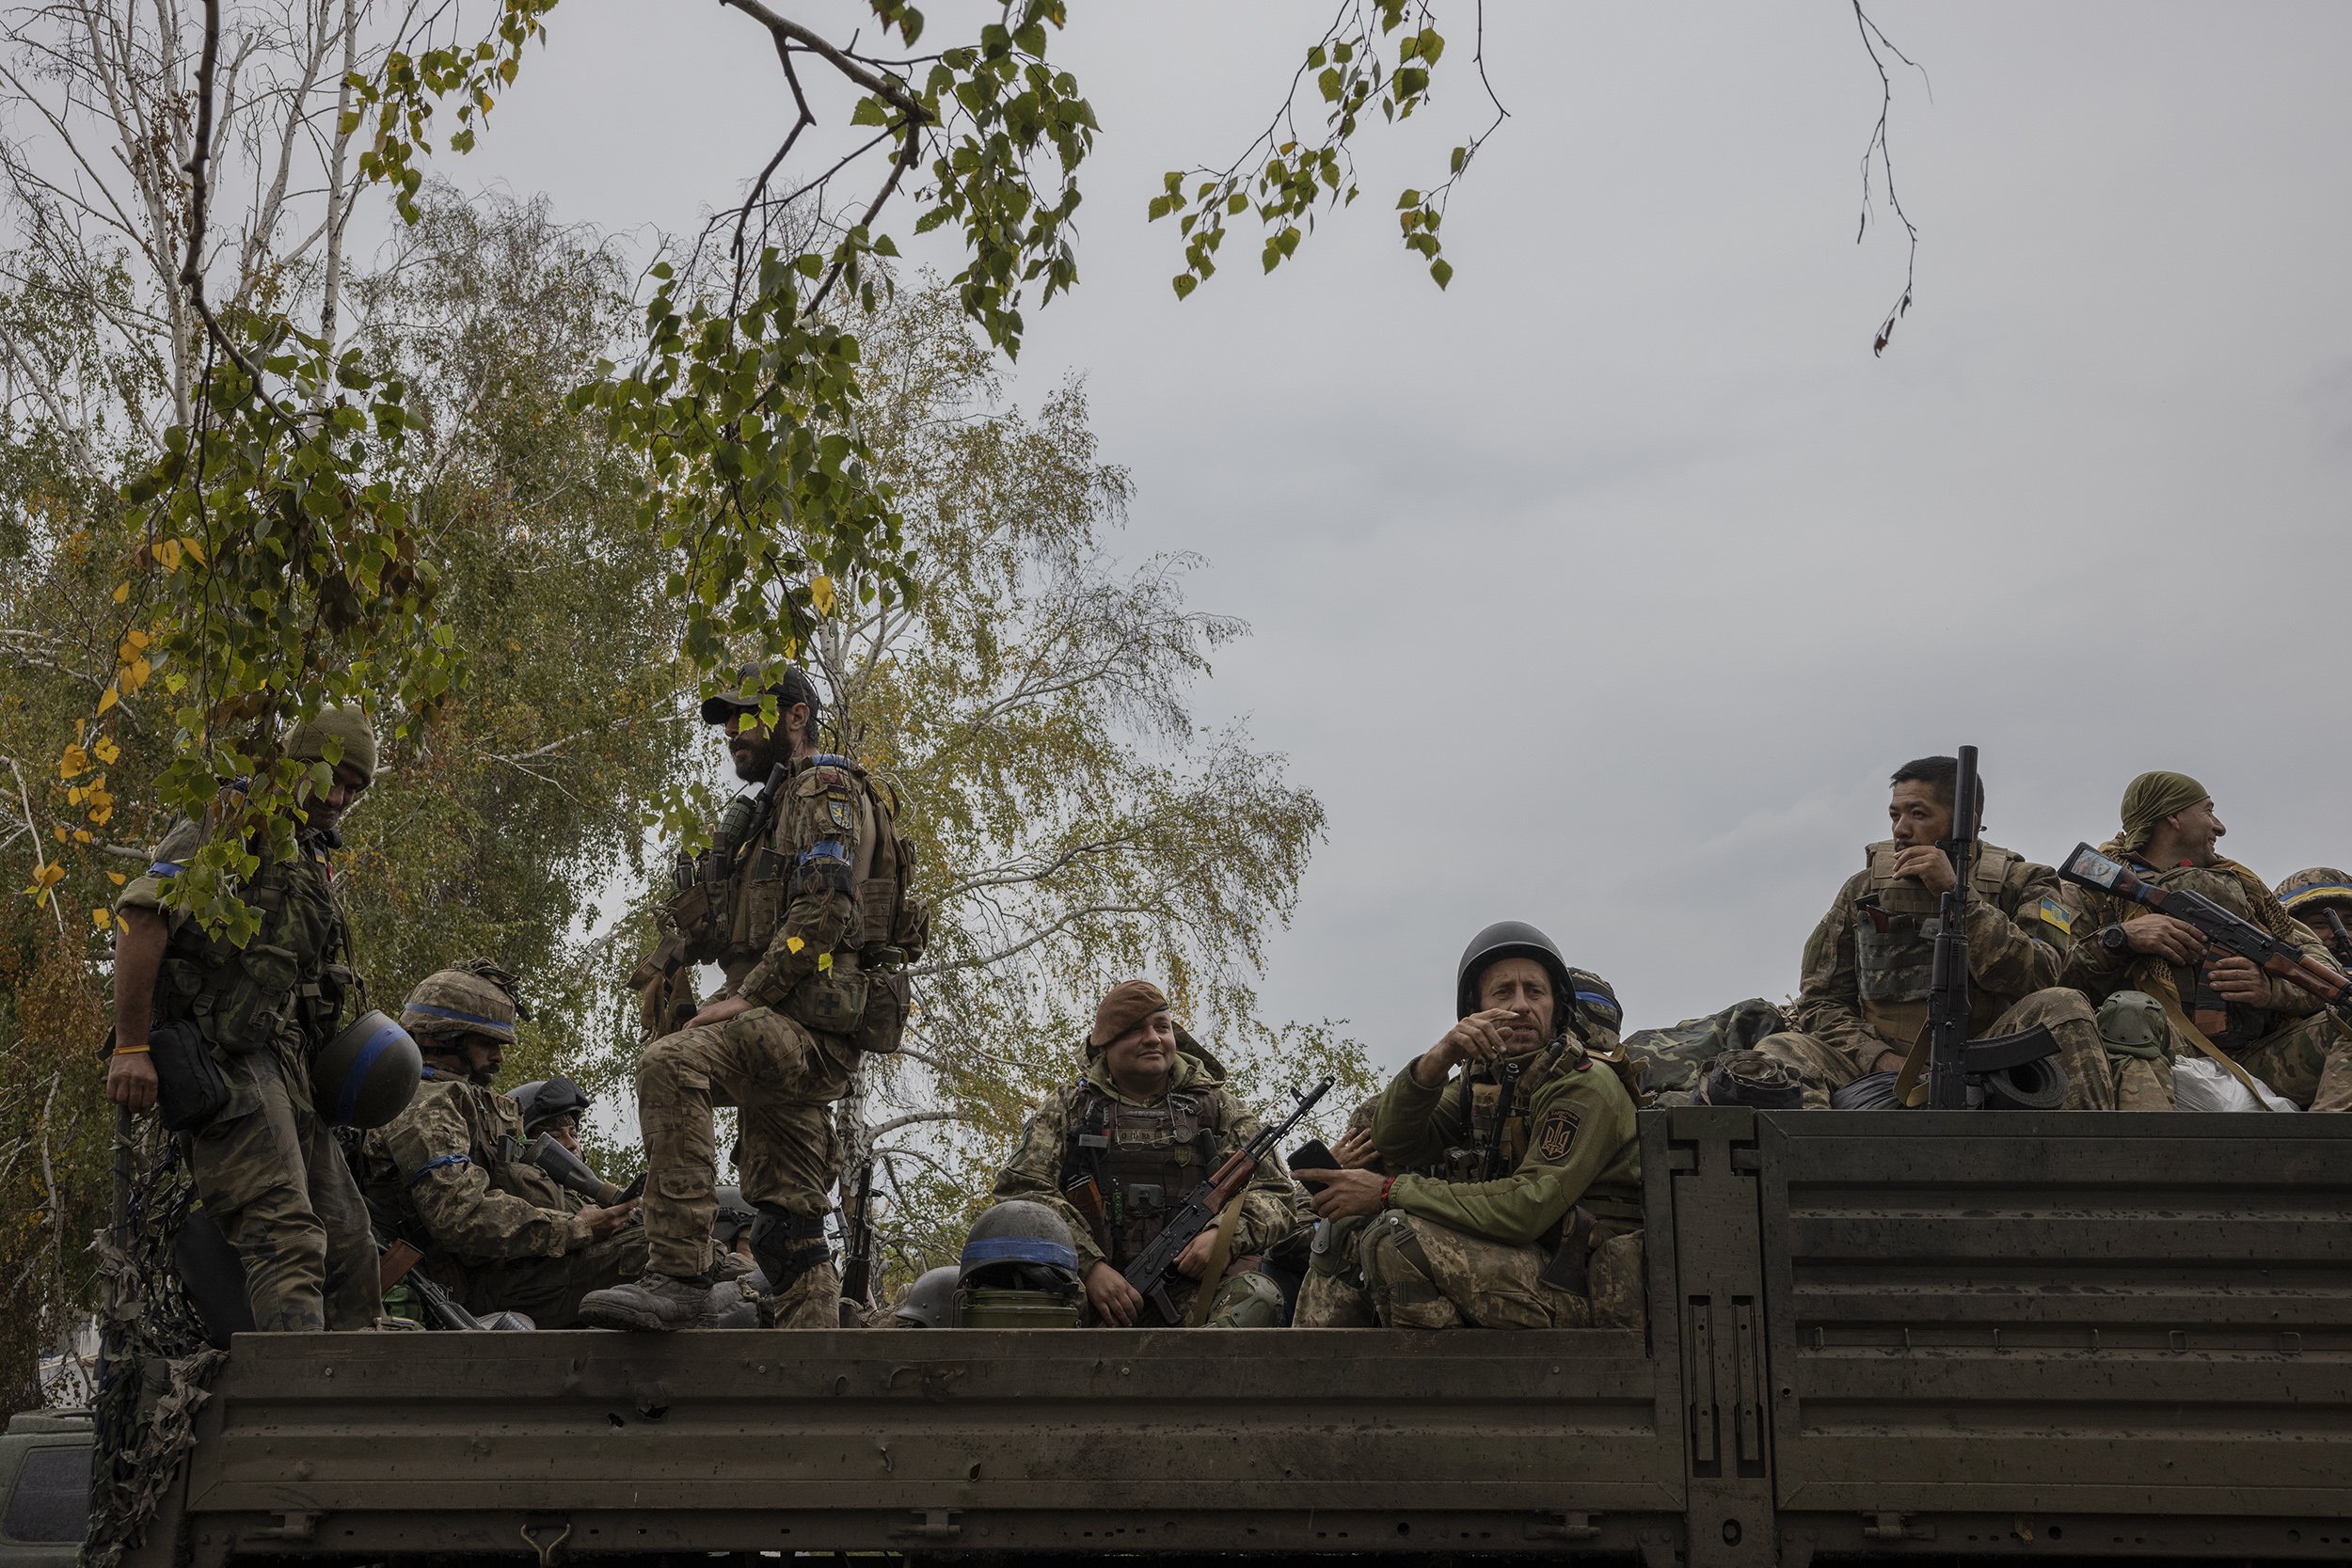  Foreign volunteer fighters with the Carpathian Sich battalion prepared to move towards a new position near the town of Lyman. The men had been part of a sweeping counter offensive that had routed Russian forces in the previous several weeks in the K